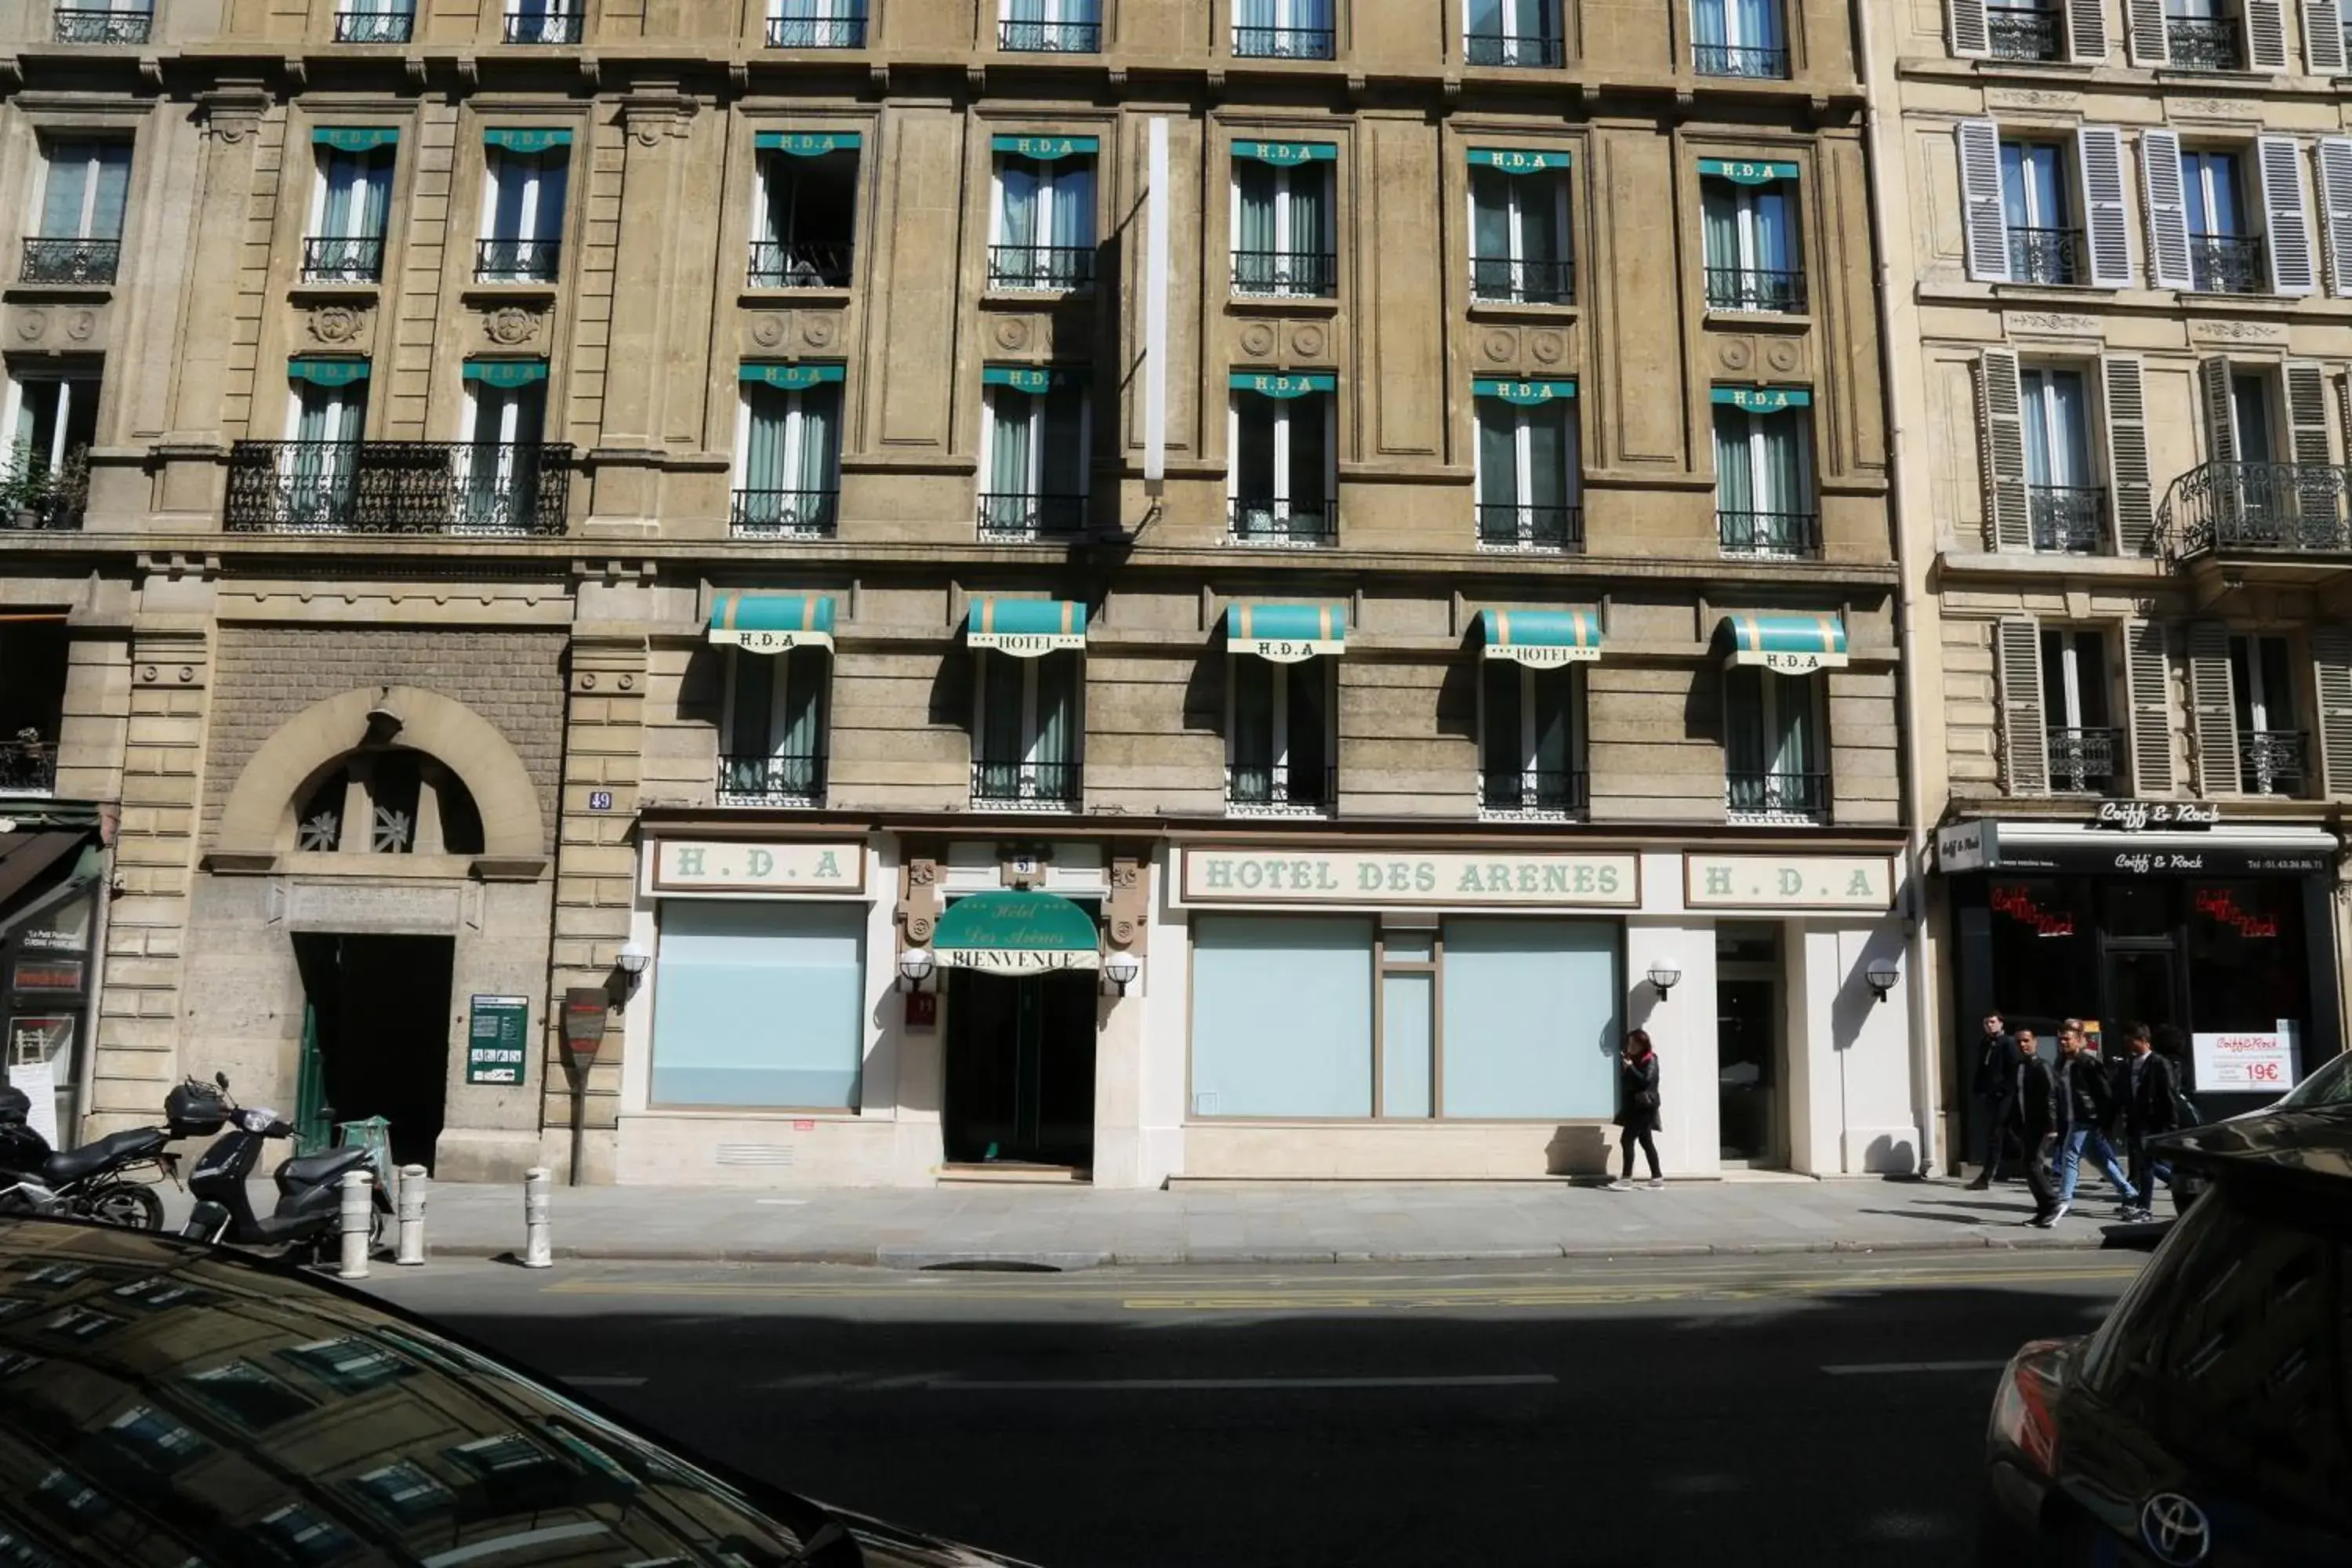 Property Building in Hotel Des Arenes